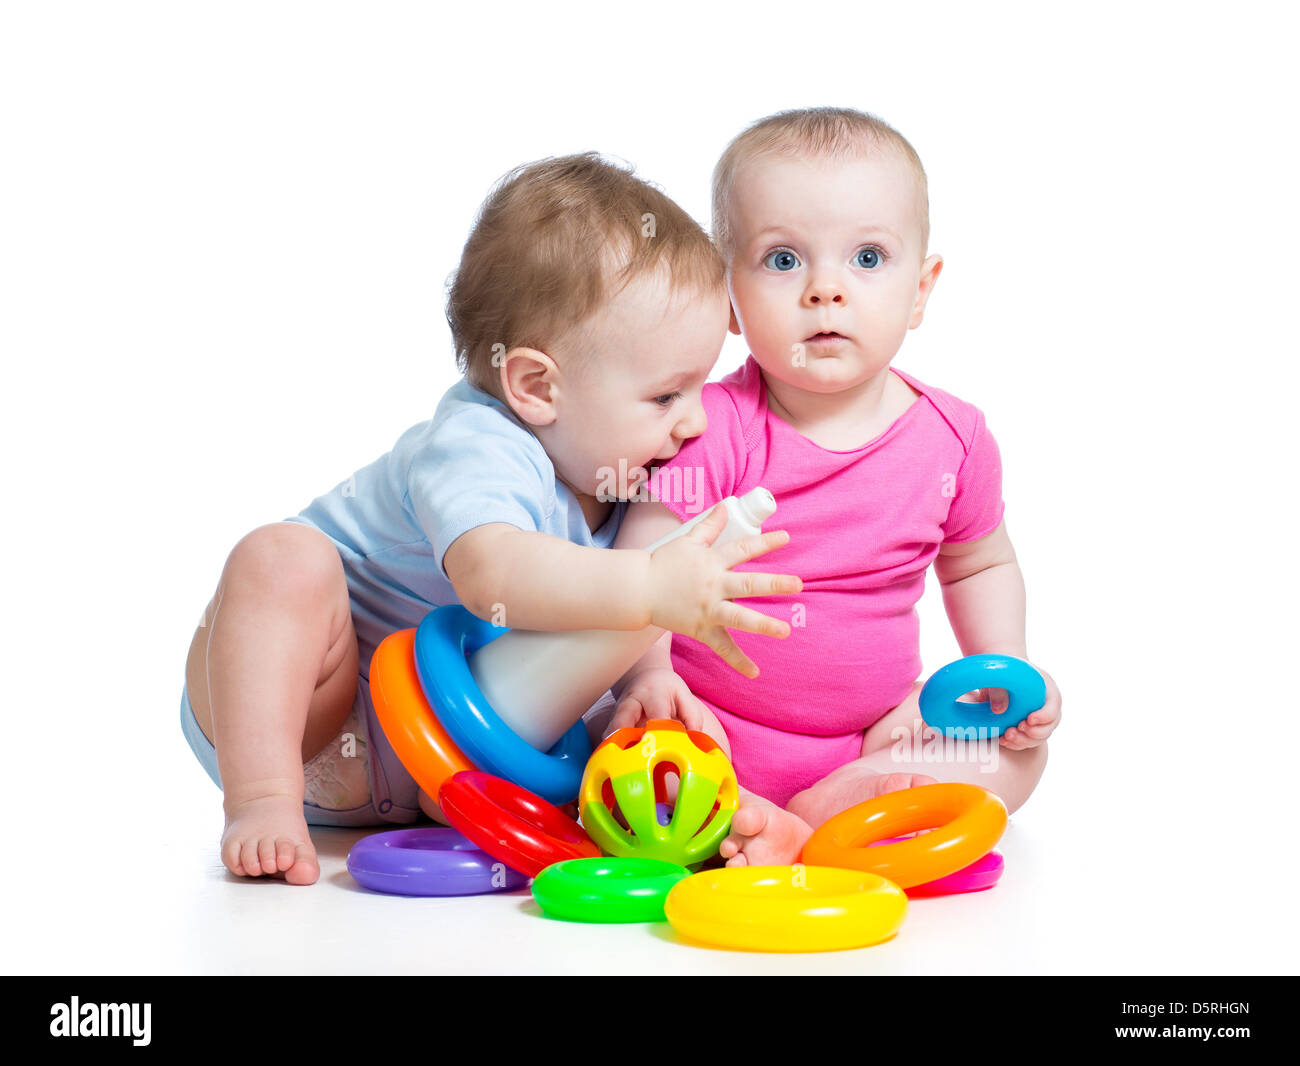 kids boy and girl playing toys together Stock Photo